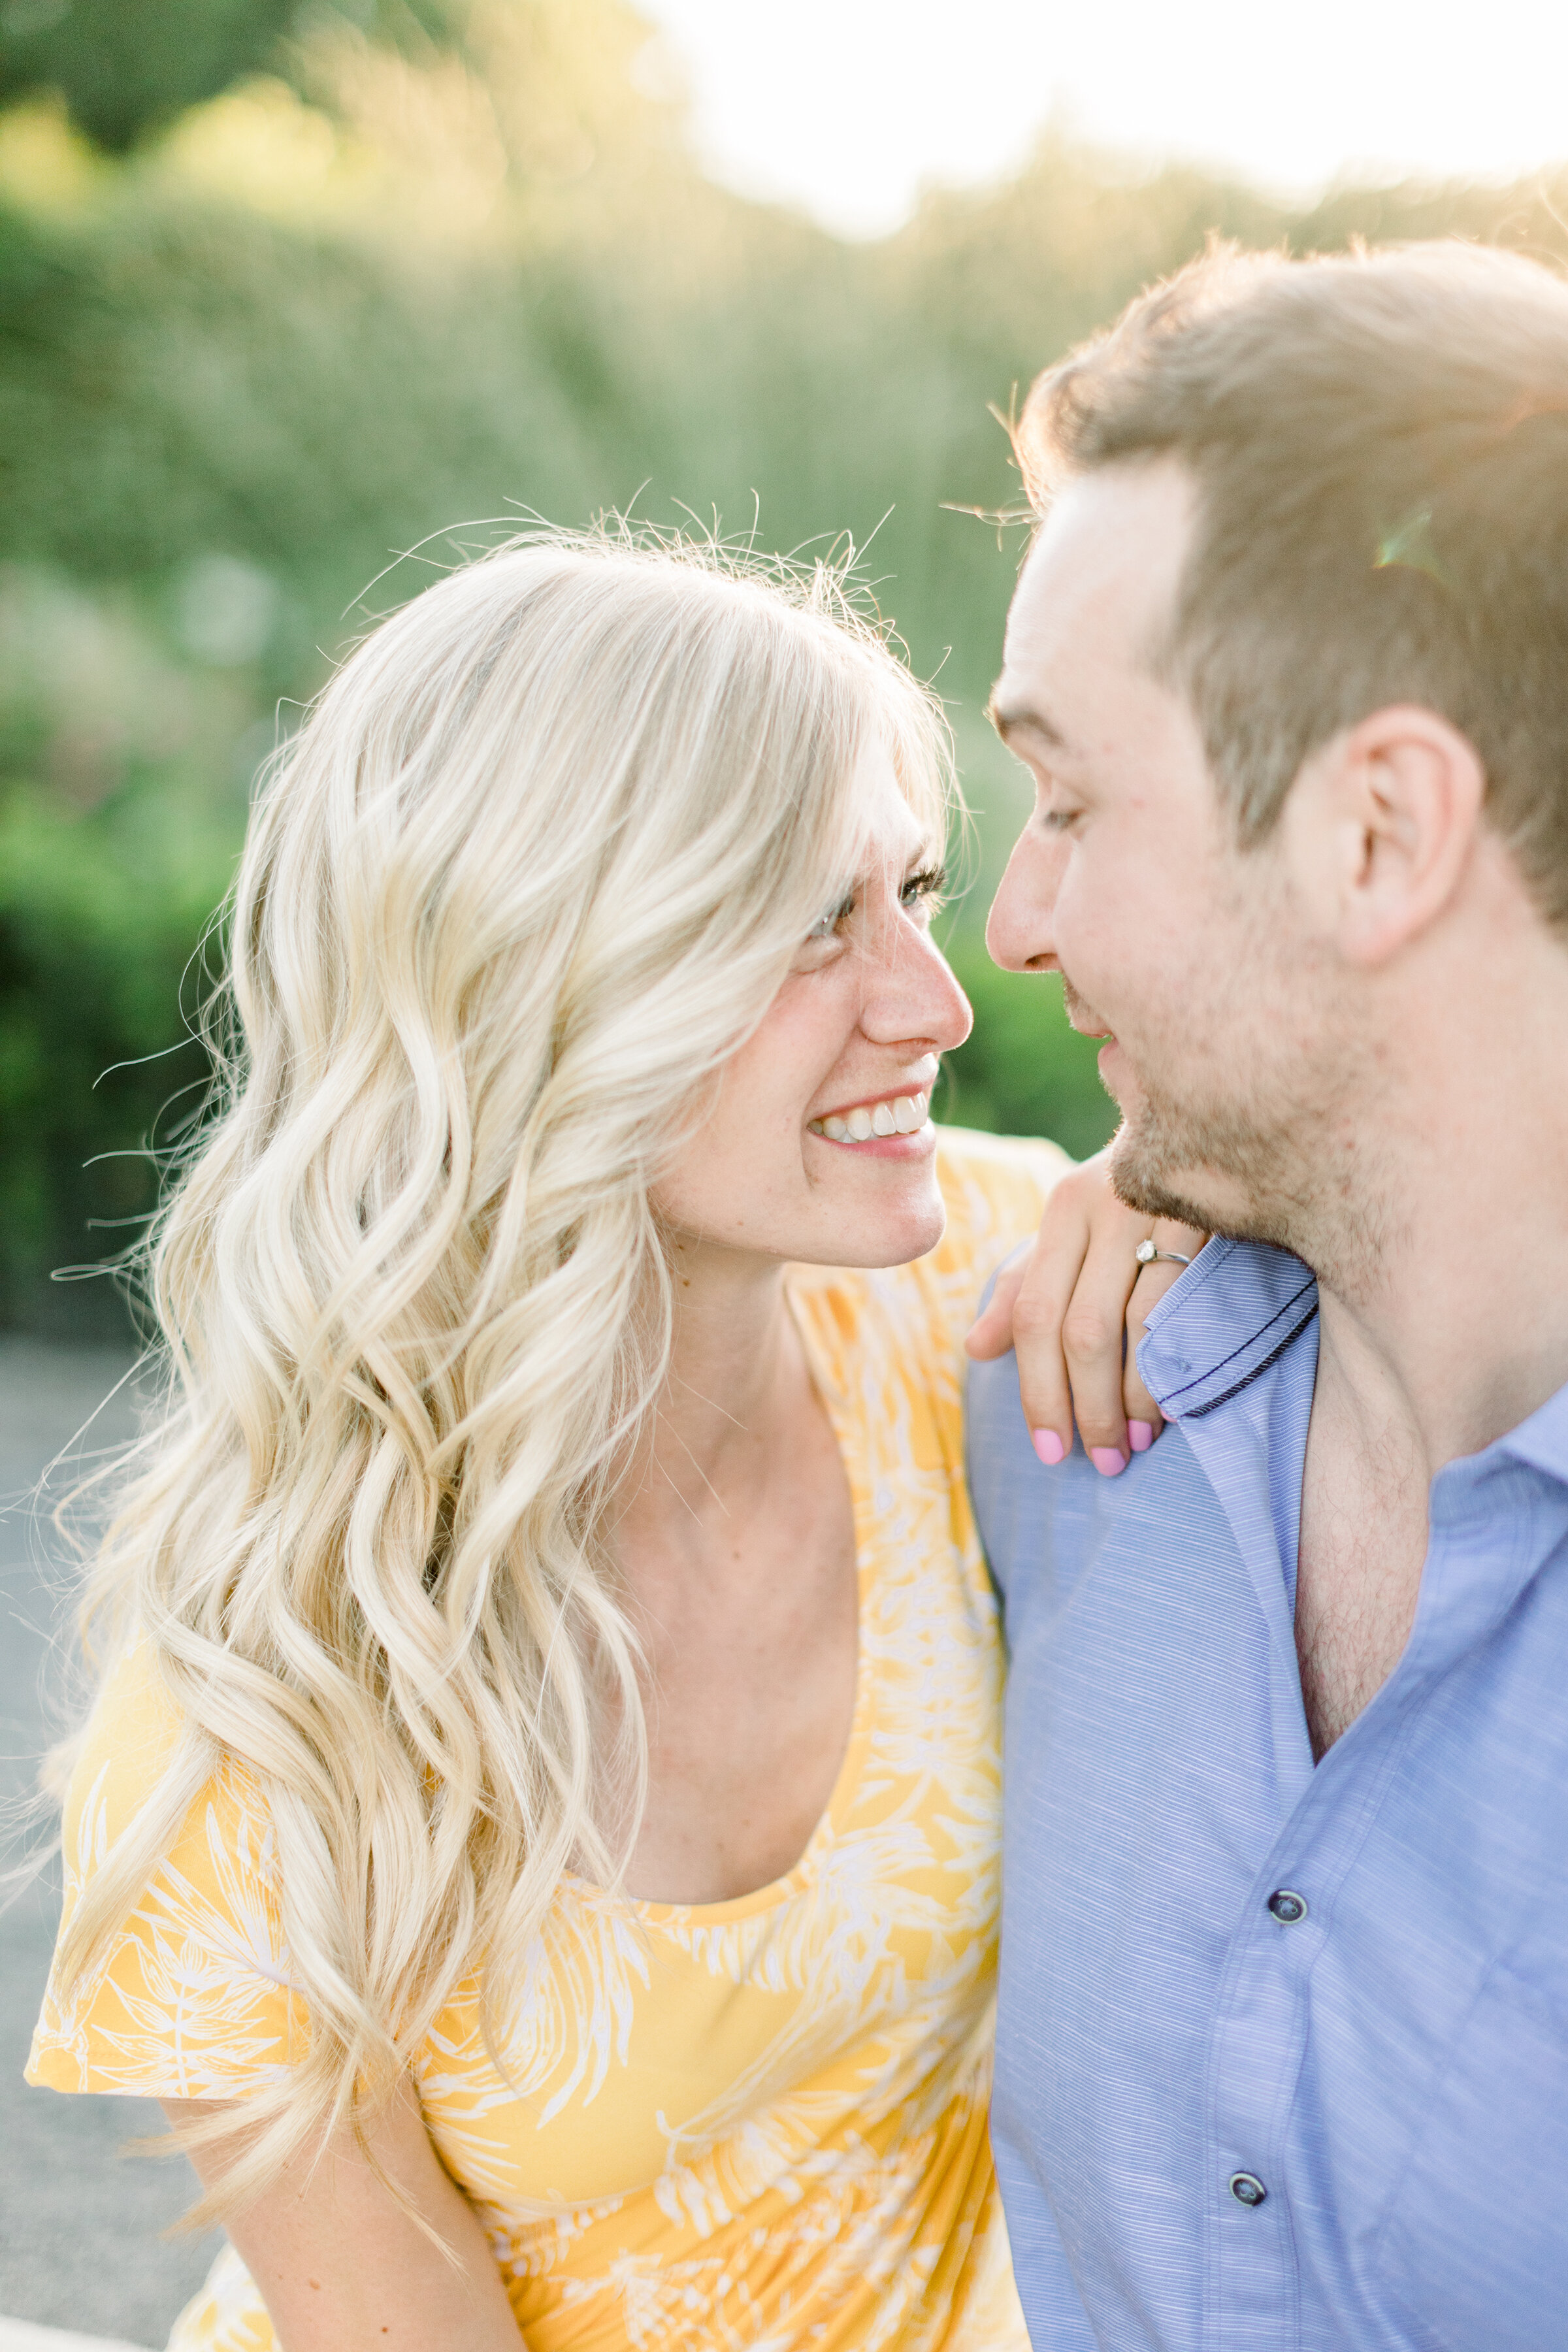  A glowing couple gaze into each others eyes in a romantic engagement session by Chelsea Mason Photography. Couple sitting pose inspiration ideas and goals professional photographer engagement session inspiration Botanical Garden Montreal Canada outd